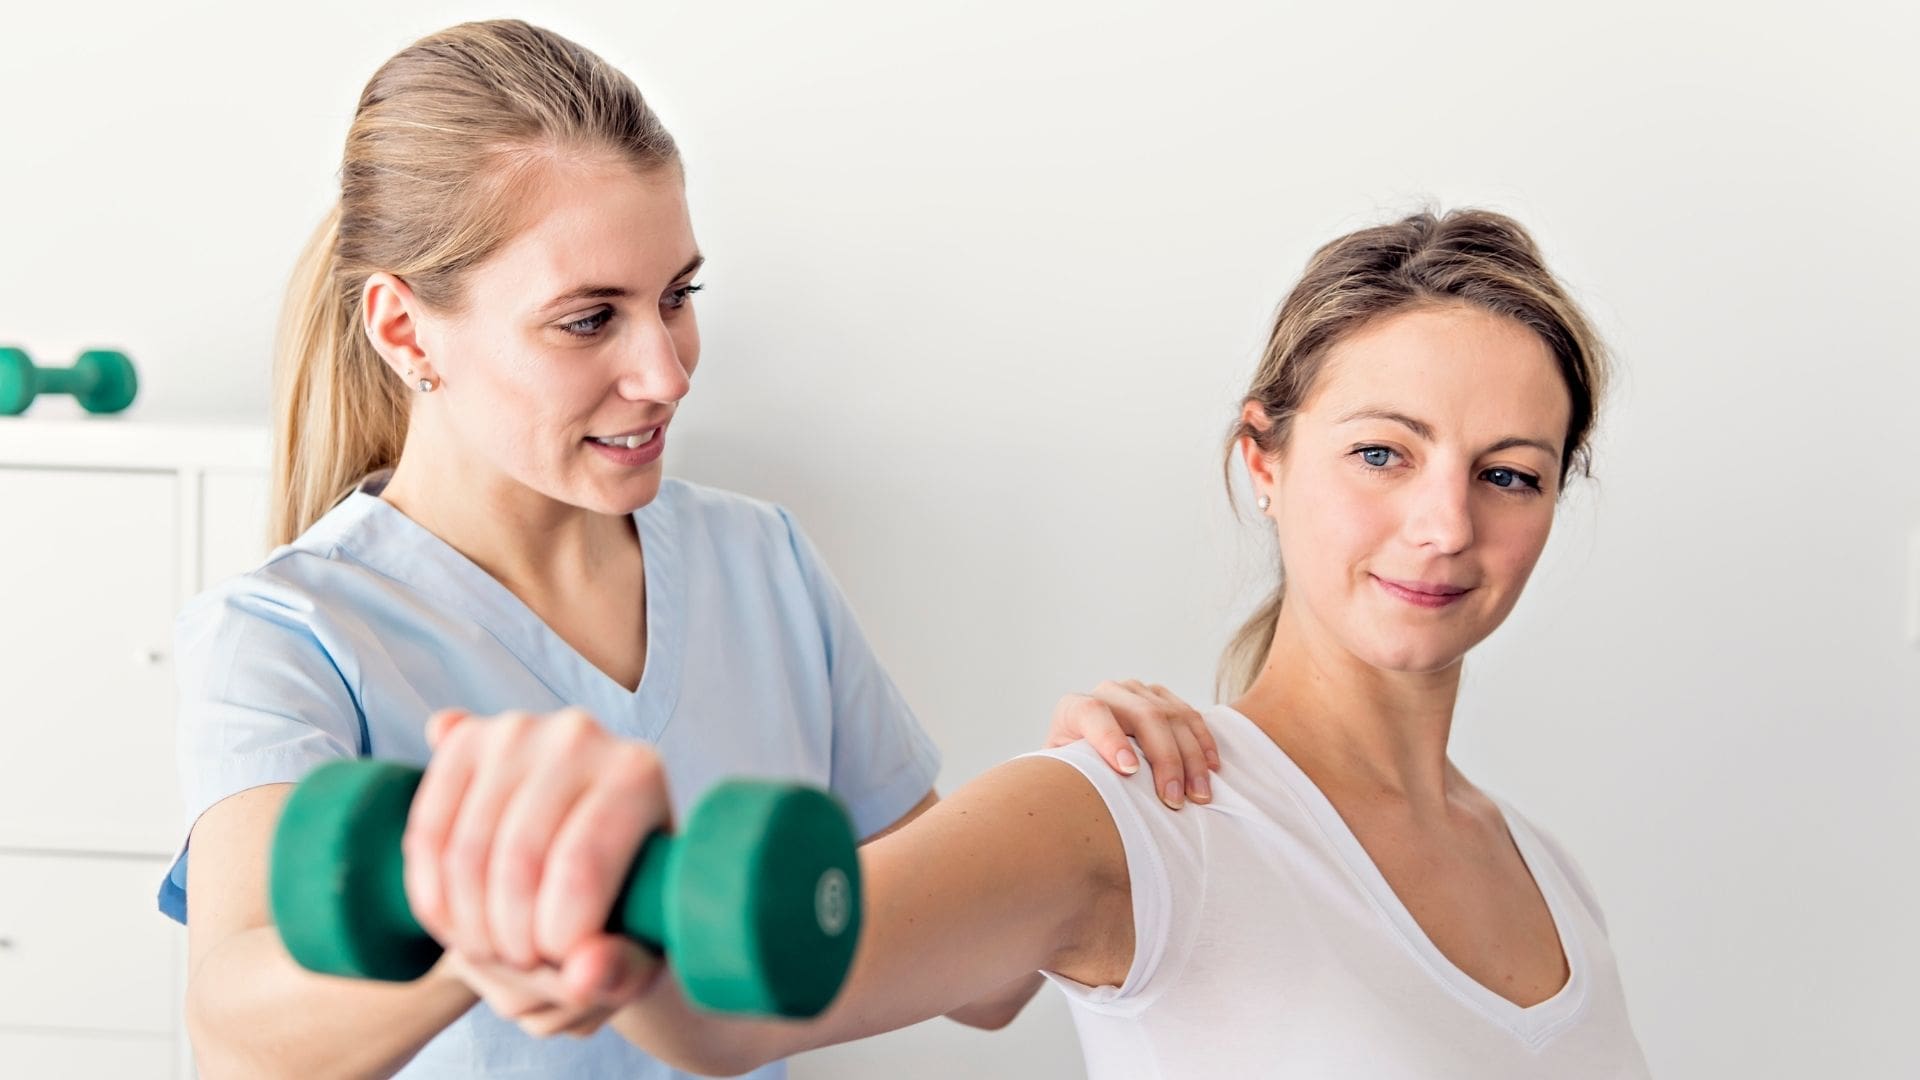 How Does Physical Therapy Help To Treat Chronic Pain?